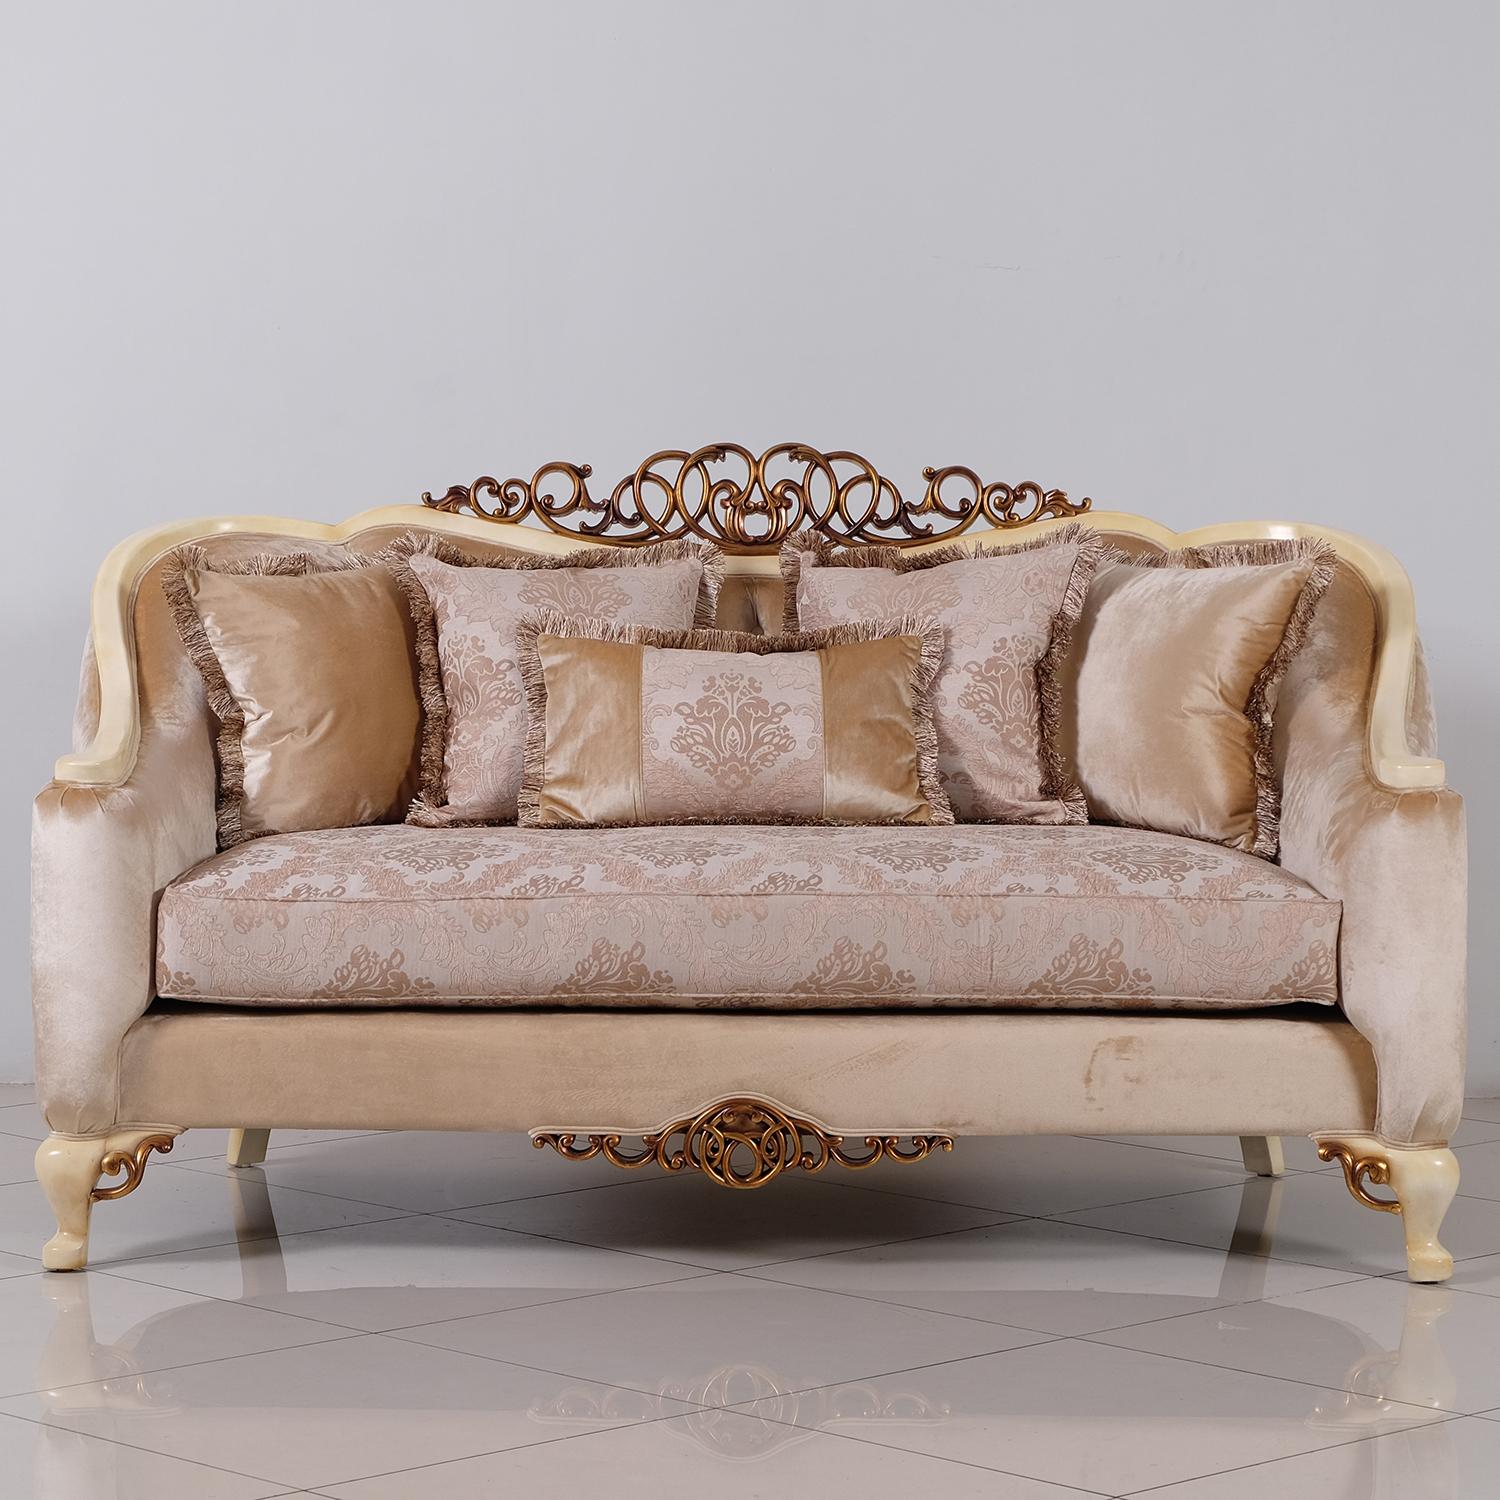 Classic, Traditional Loveseat ANGELICA 45350-L in Pearl, Antique, Gold, Beige Fabric